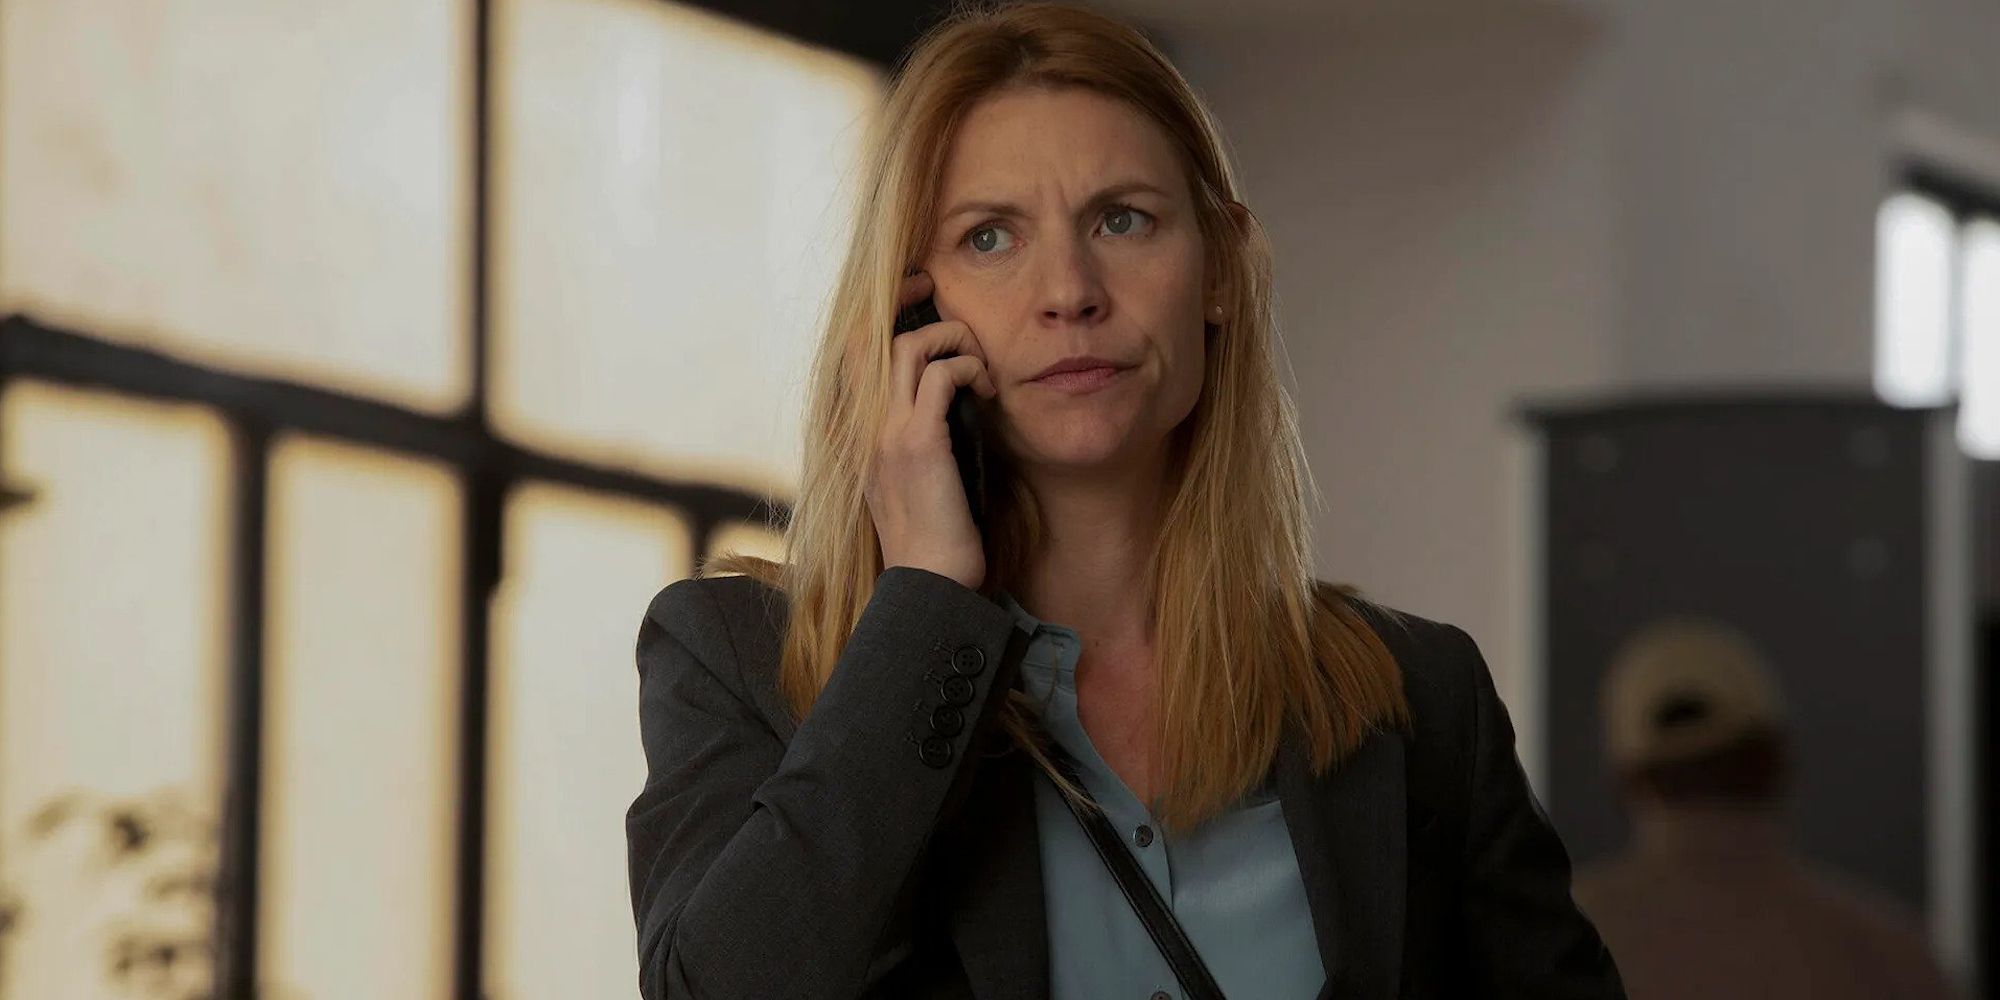 Claire Danes as Carrie Matthison talking on her cellphone in Homeland